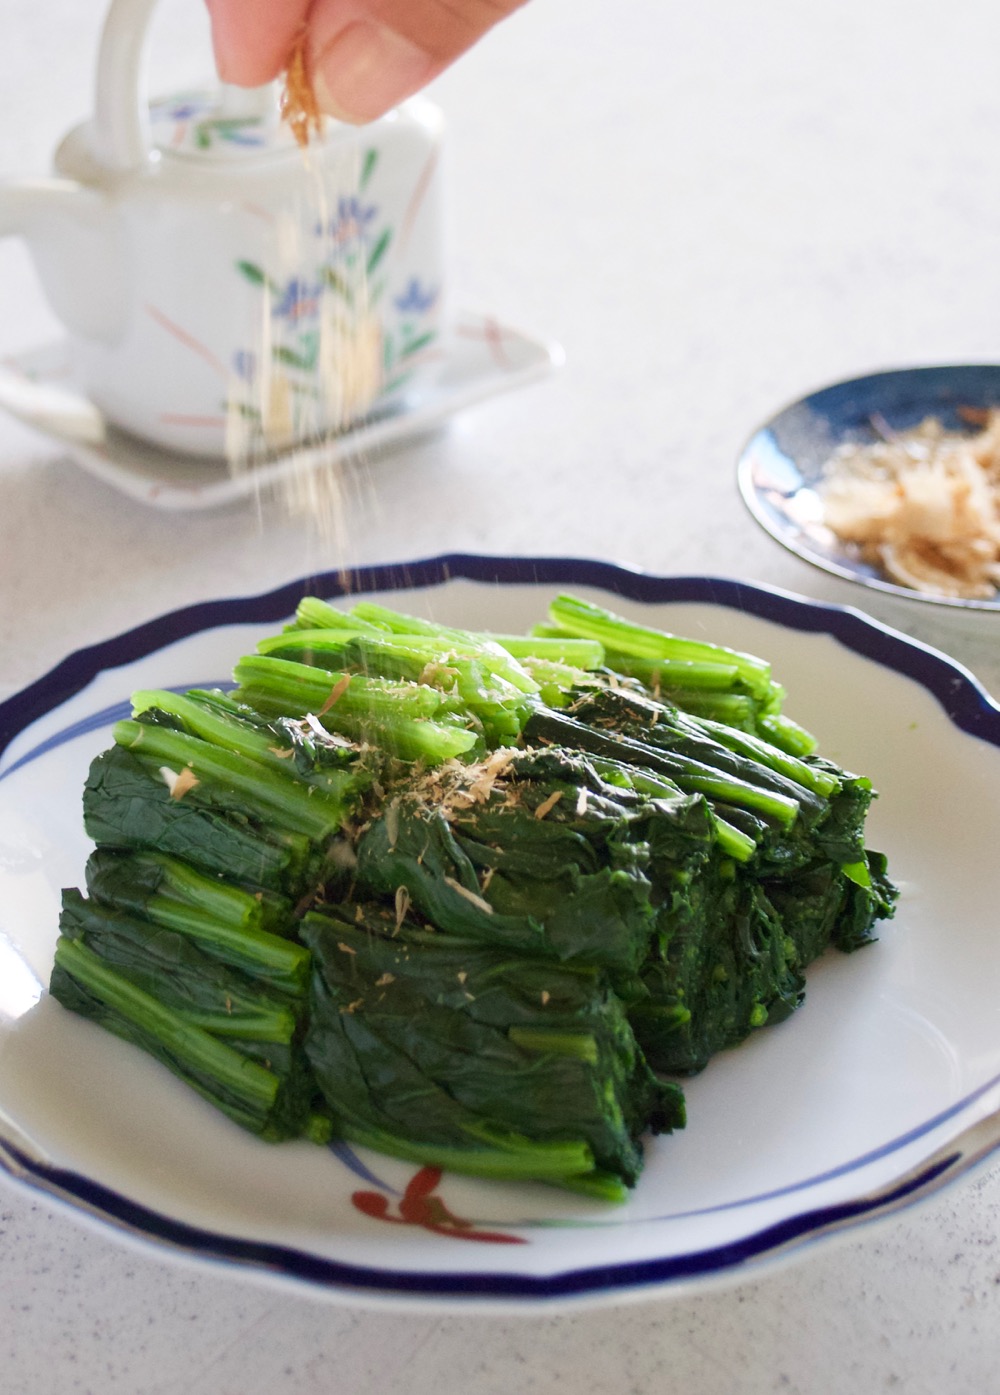 Spinach ohitashi salad is a very simple dish as a side or substitute for salad. Simply boil and serve with bonito flakes topping, or sesame seeds if vegetarian.